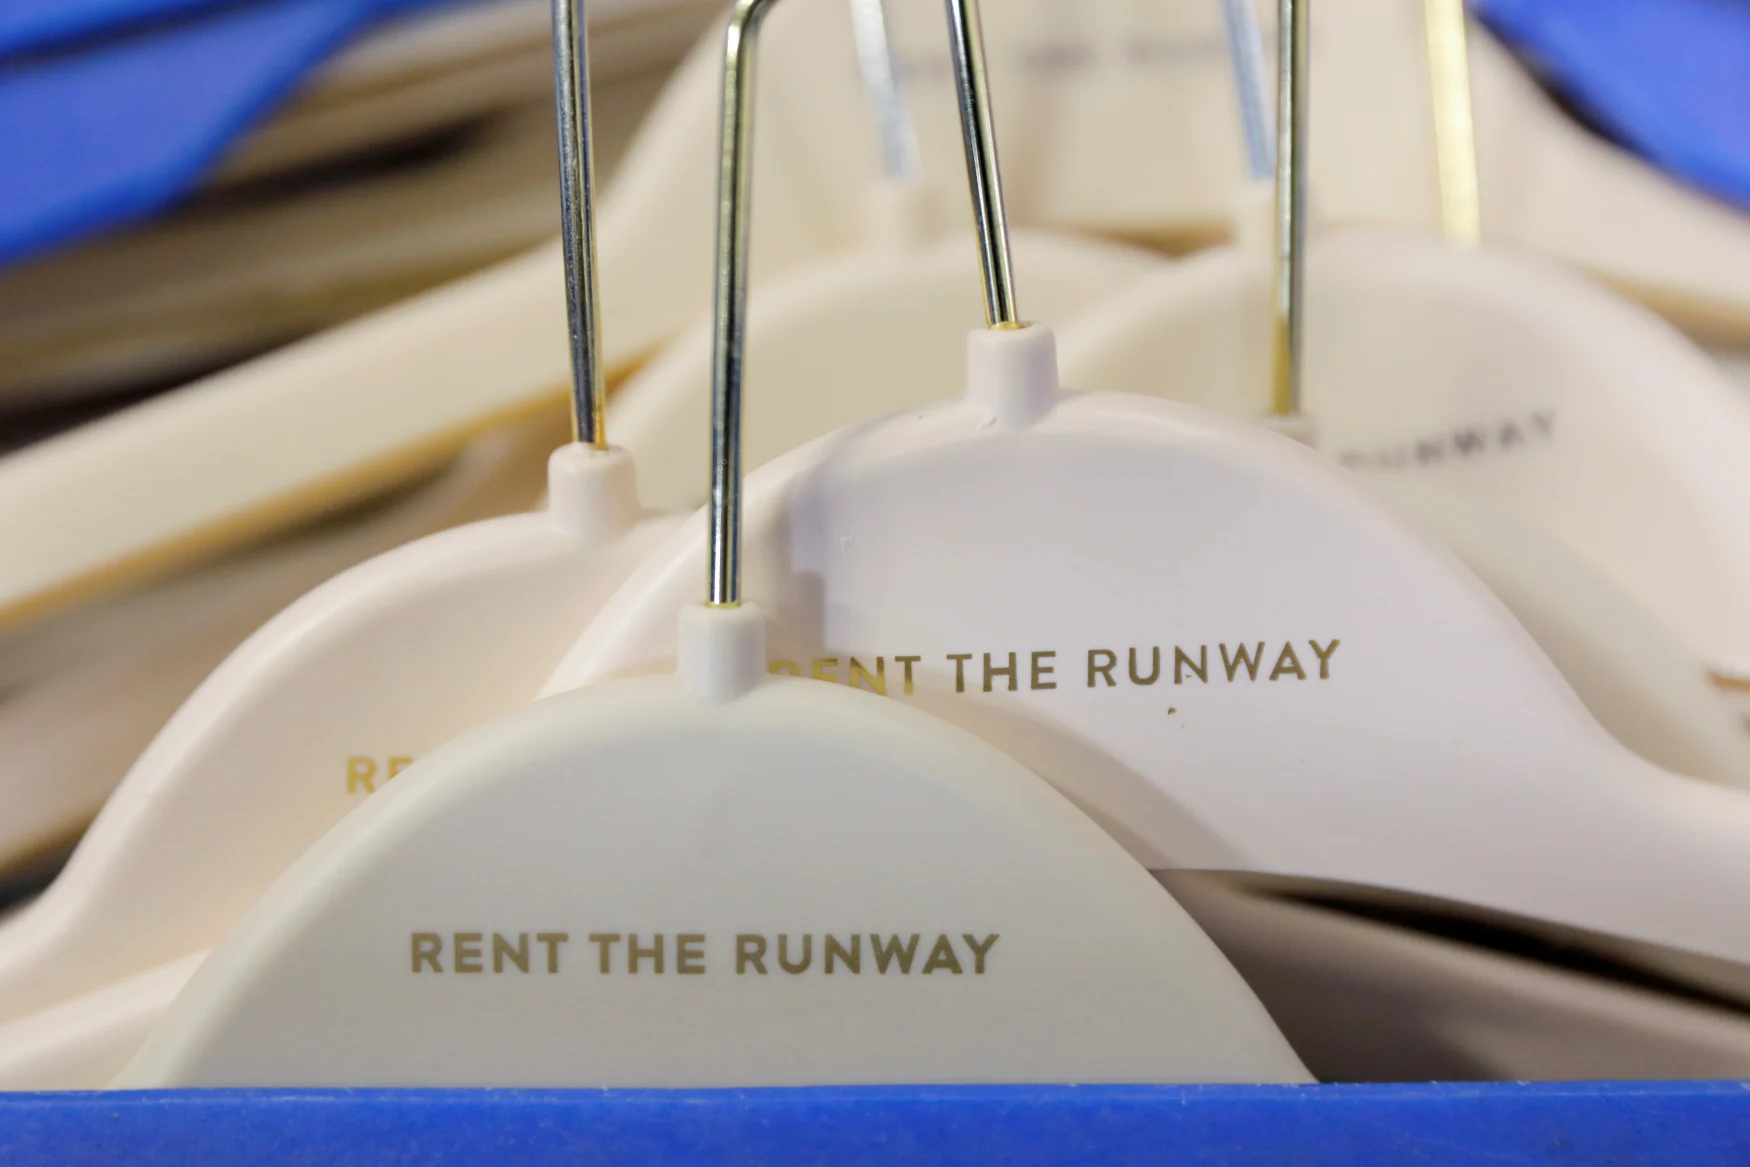 Hangers are seen at Rent the Runway's "Dream Fulfillment Center" in Secaucus, New Jersey, U.S., September 11, 2019. Picture taken September 11, 2019. REUTERS/Andrew Kelly